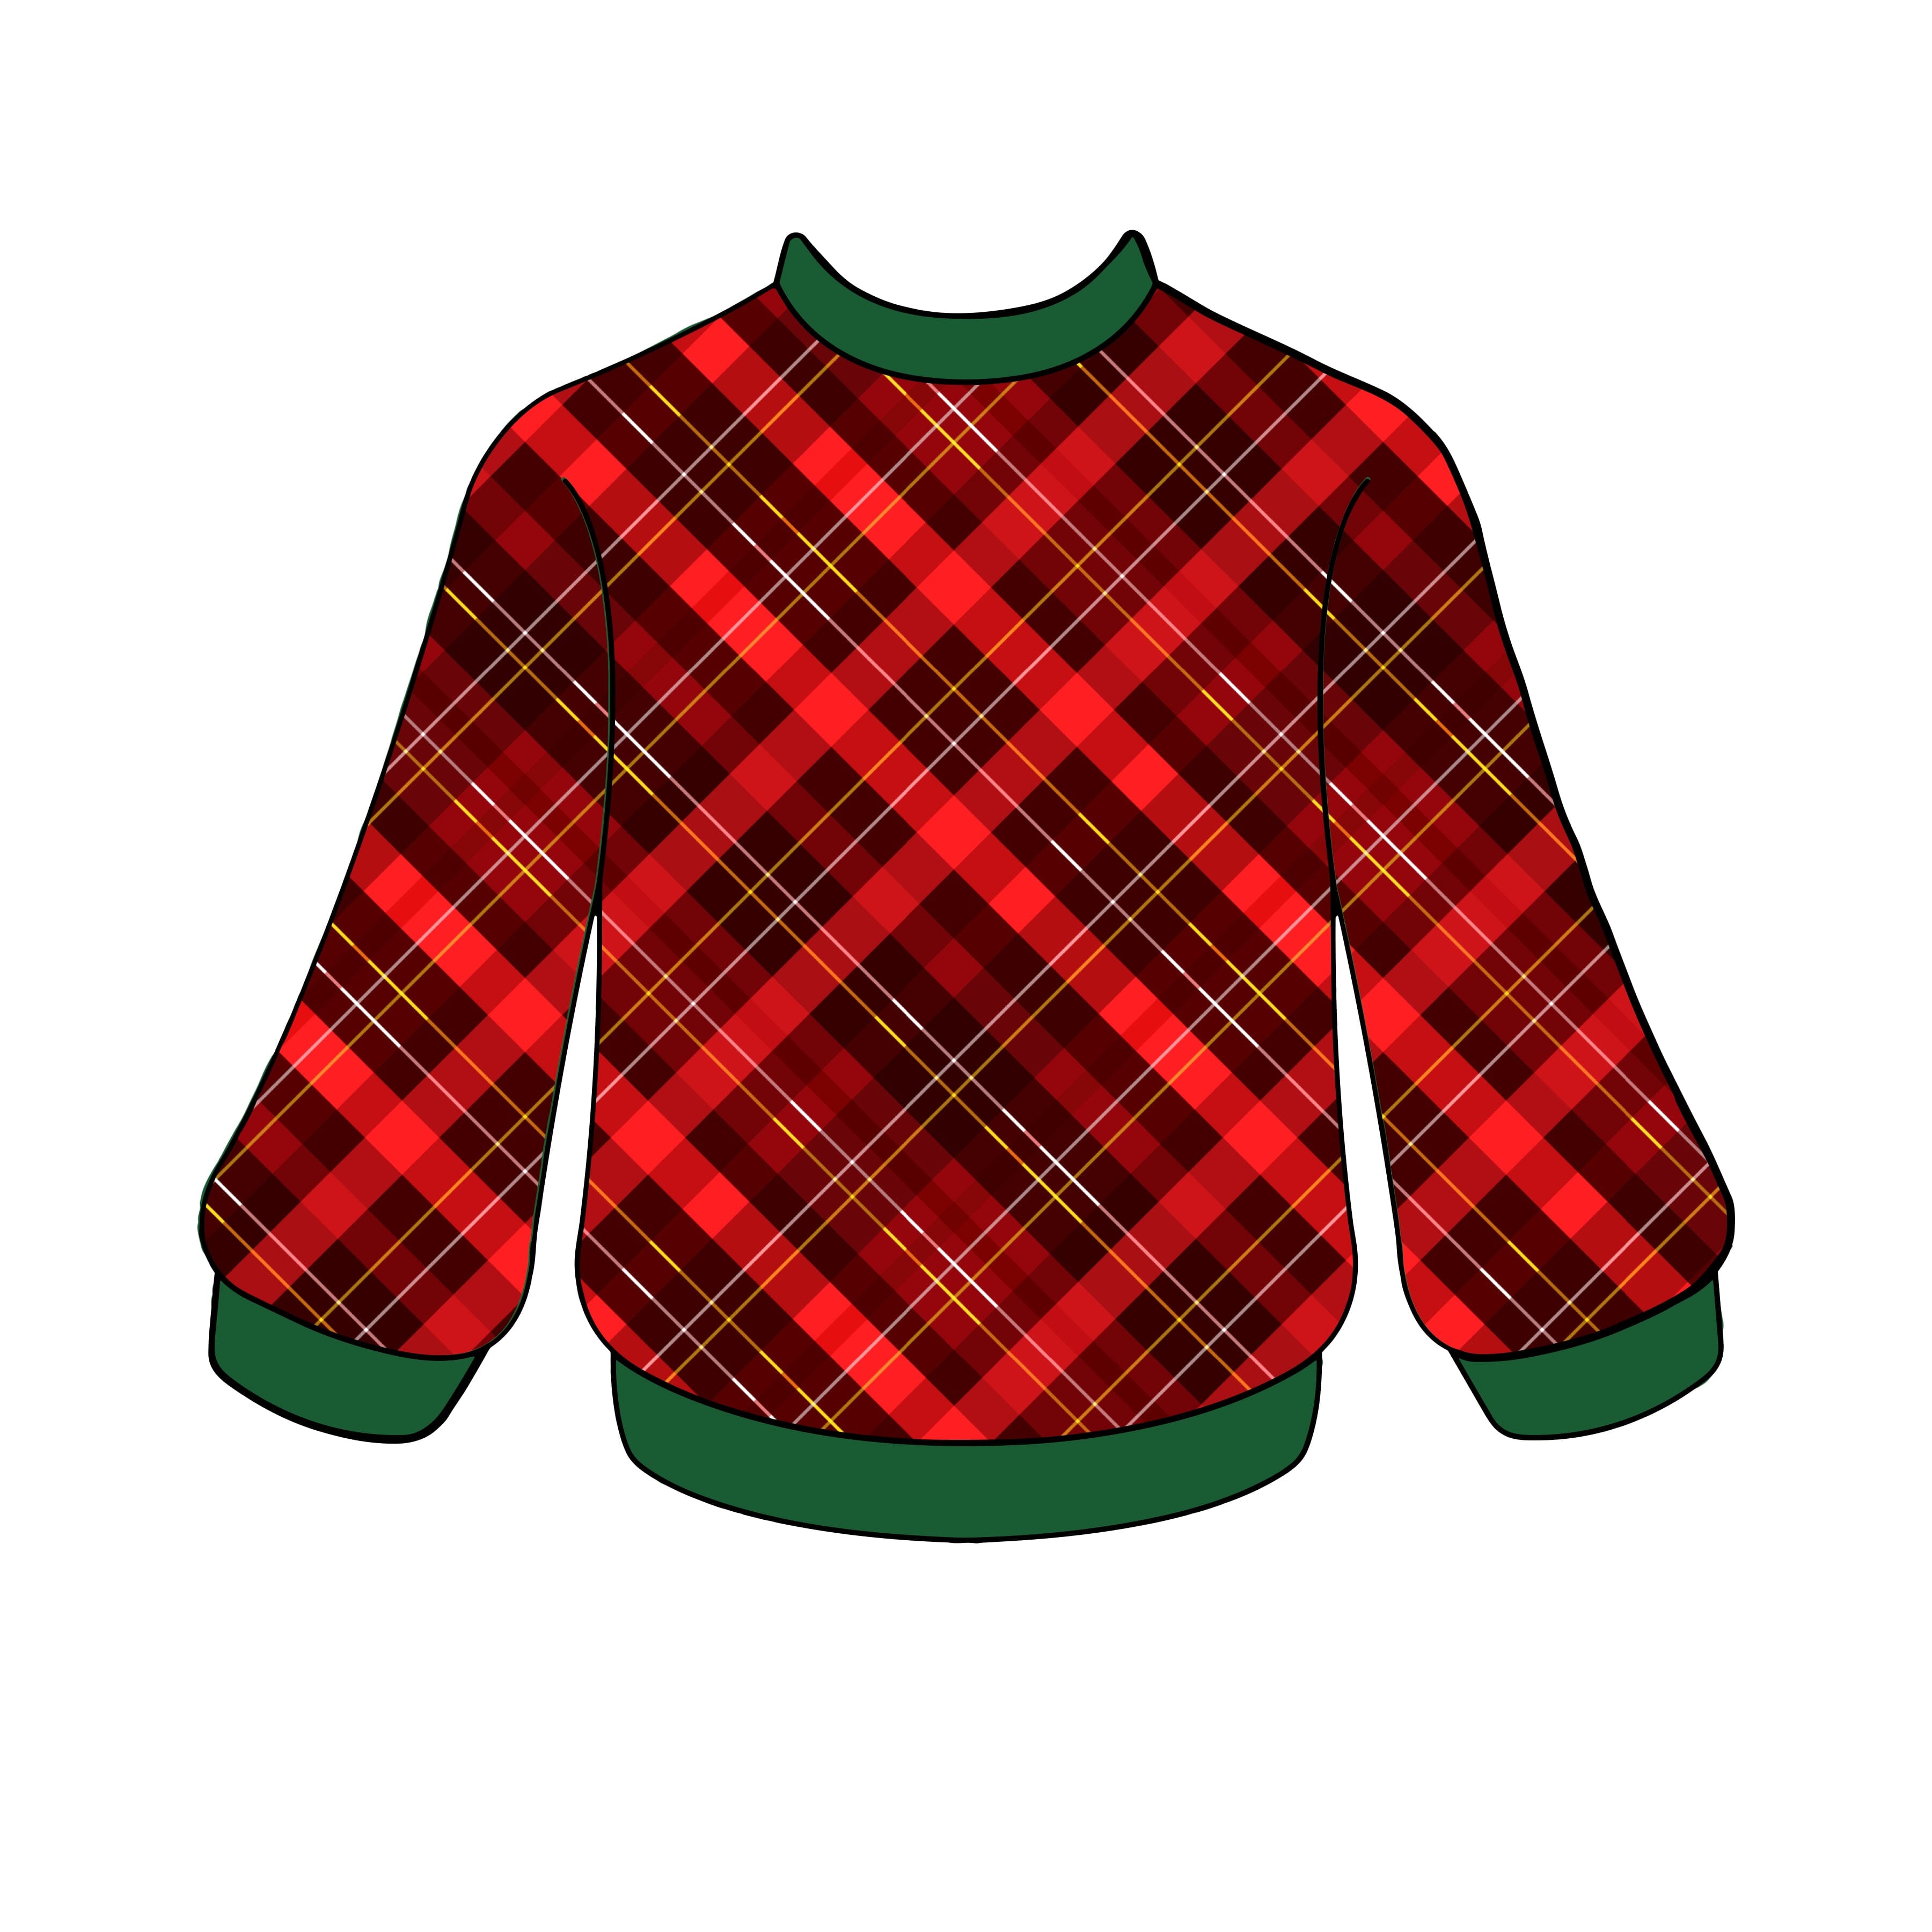 https://sofontsy.com/cdn/shop/files/ugly-plaid-christmas-sweater-svg-download-merry-christmas-svg-christmas-sweater-svg-ugly-christmas-sweater-svg-sweater-pattern-svgs-svg-whitetailcrafts-210458_3600x.jpg?v=1700880275